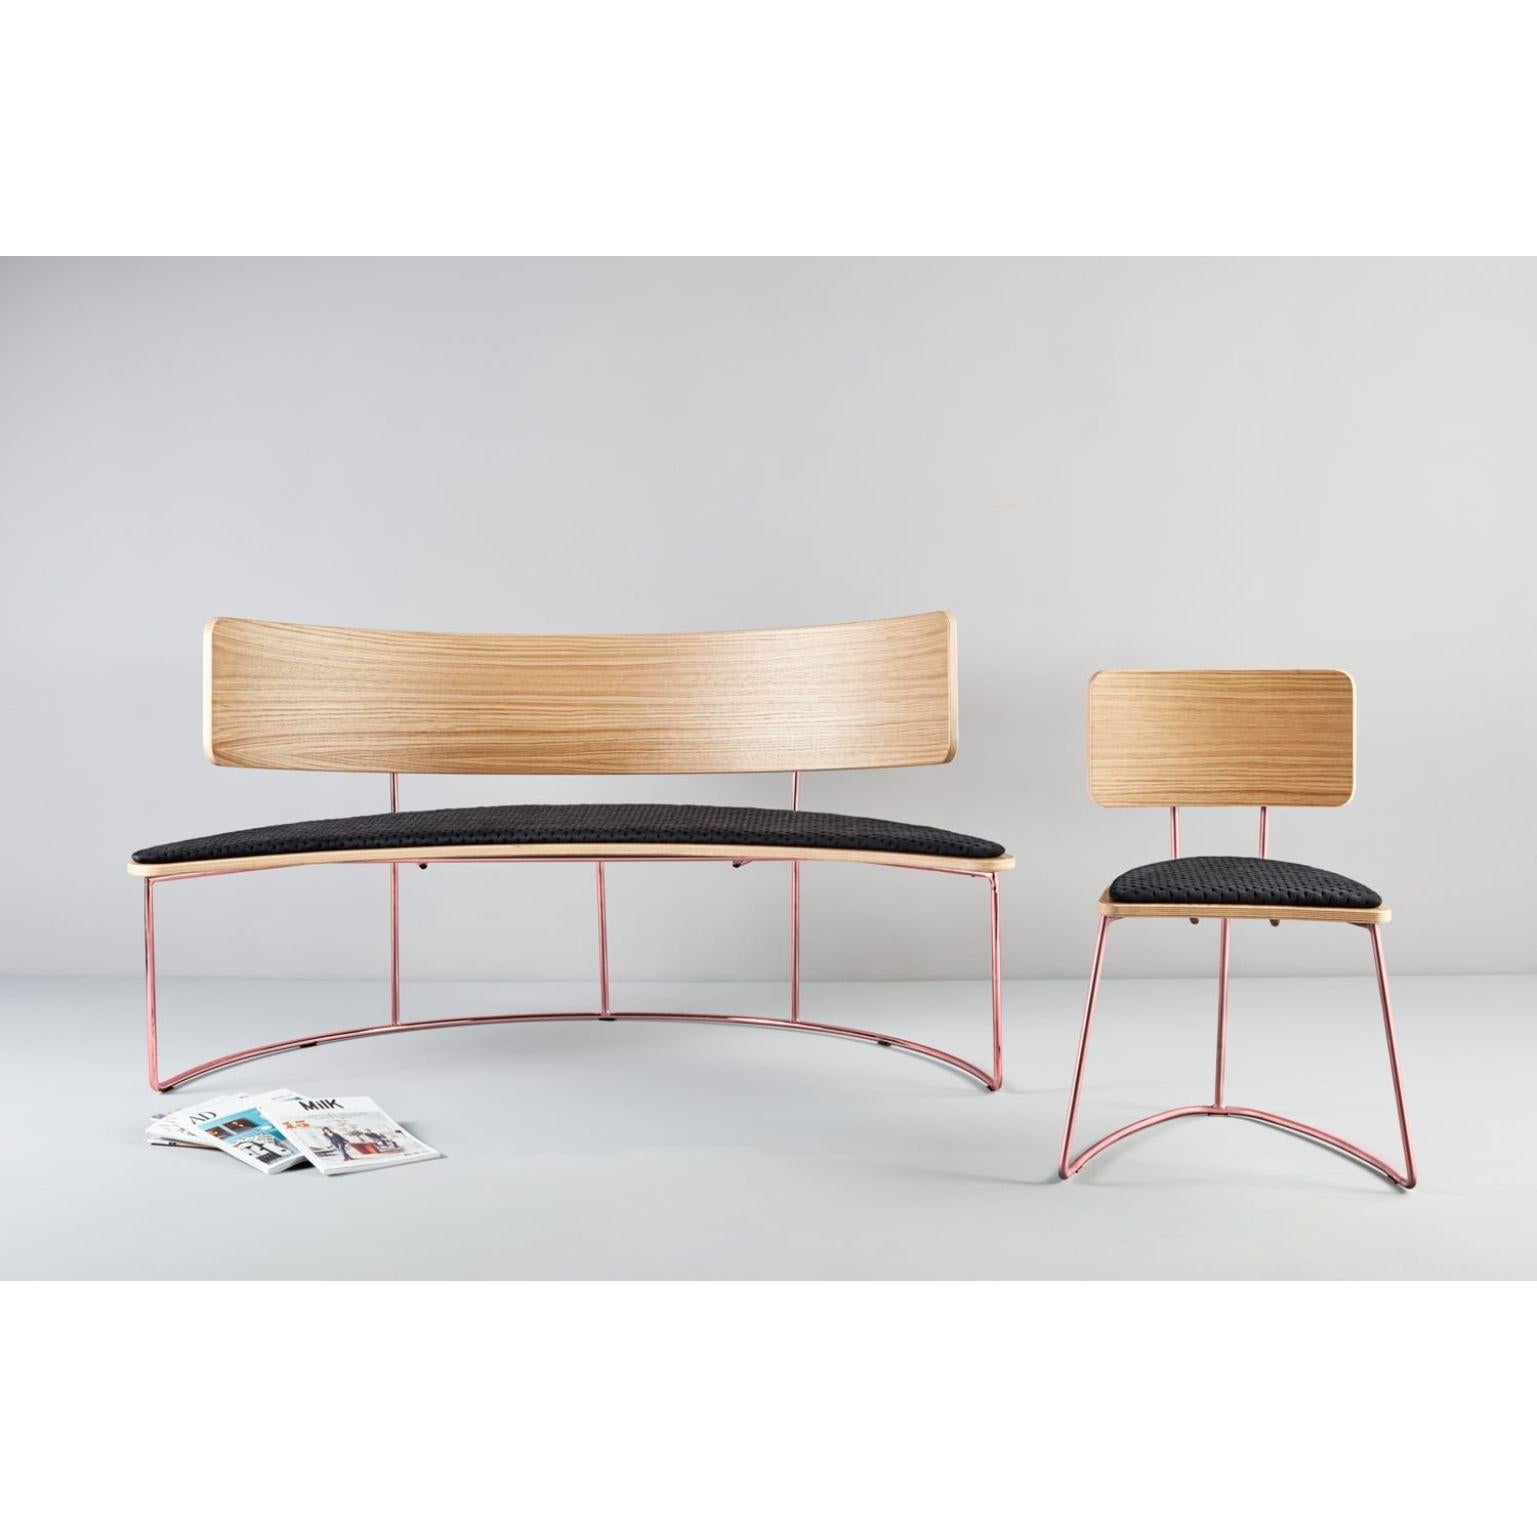 Set of boomerang bench & chair, black by Pepe Albargues
Dimensions: W152, D72, H79, Seat 43 (Bench)
W54, D54, H76, Seat 46 (Chair)
Materials: Paint coated iron structure / gold / copper or chromed iron structure
Plywood backrest and seat covered